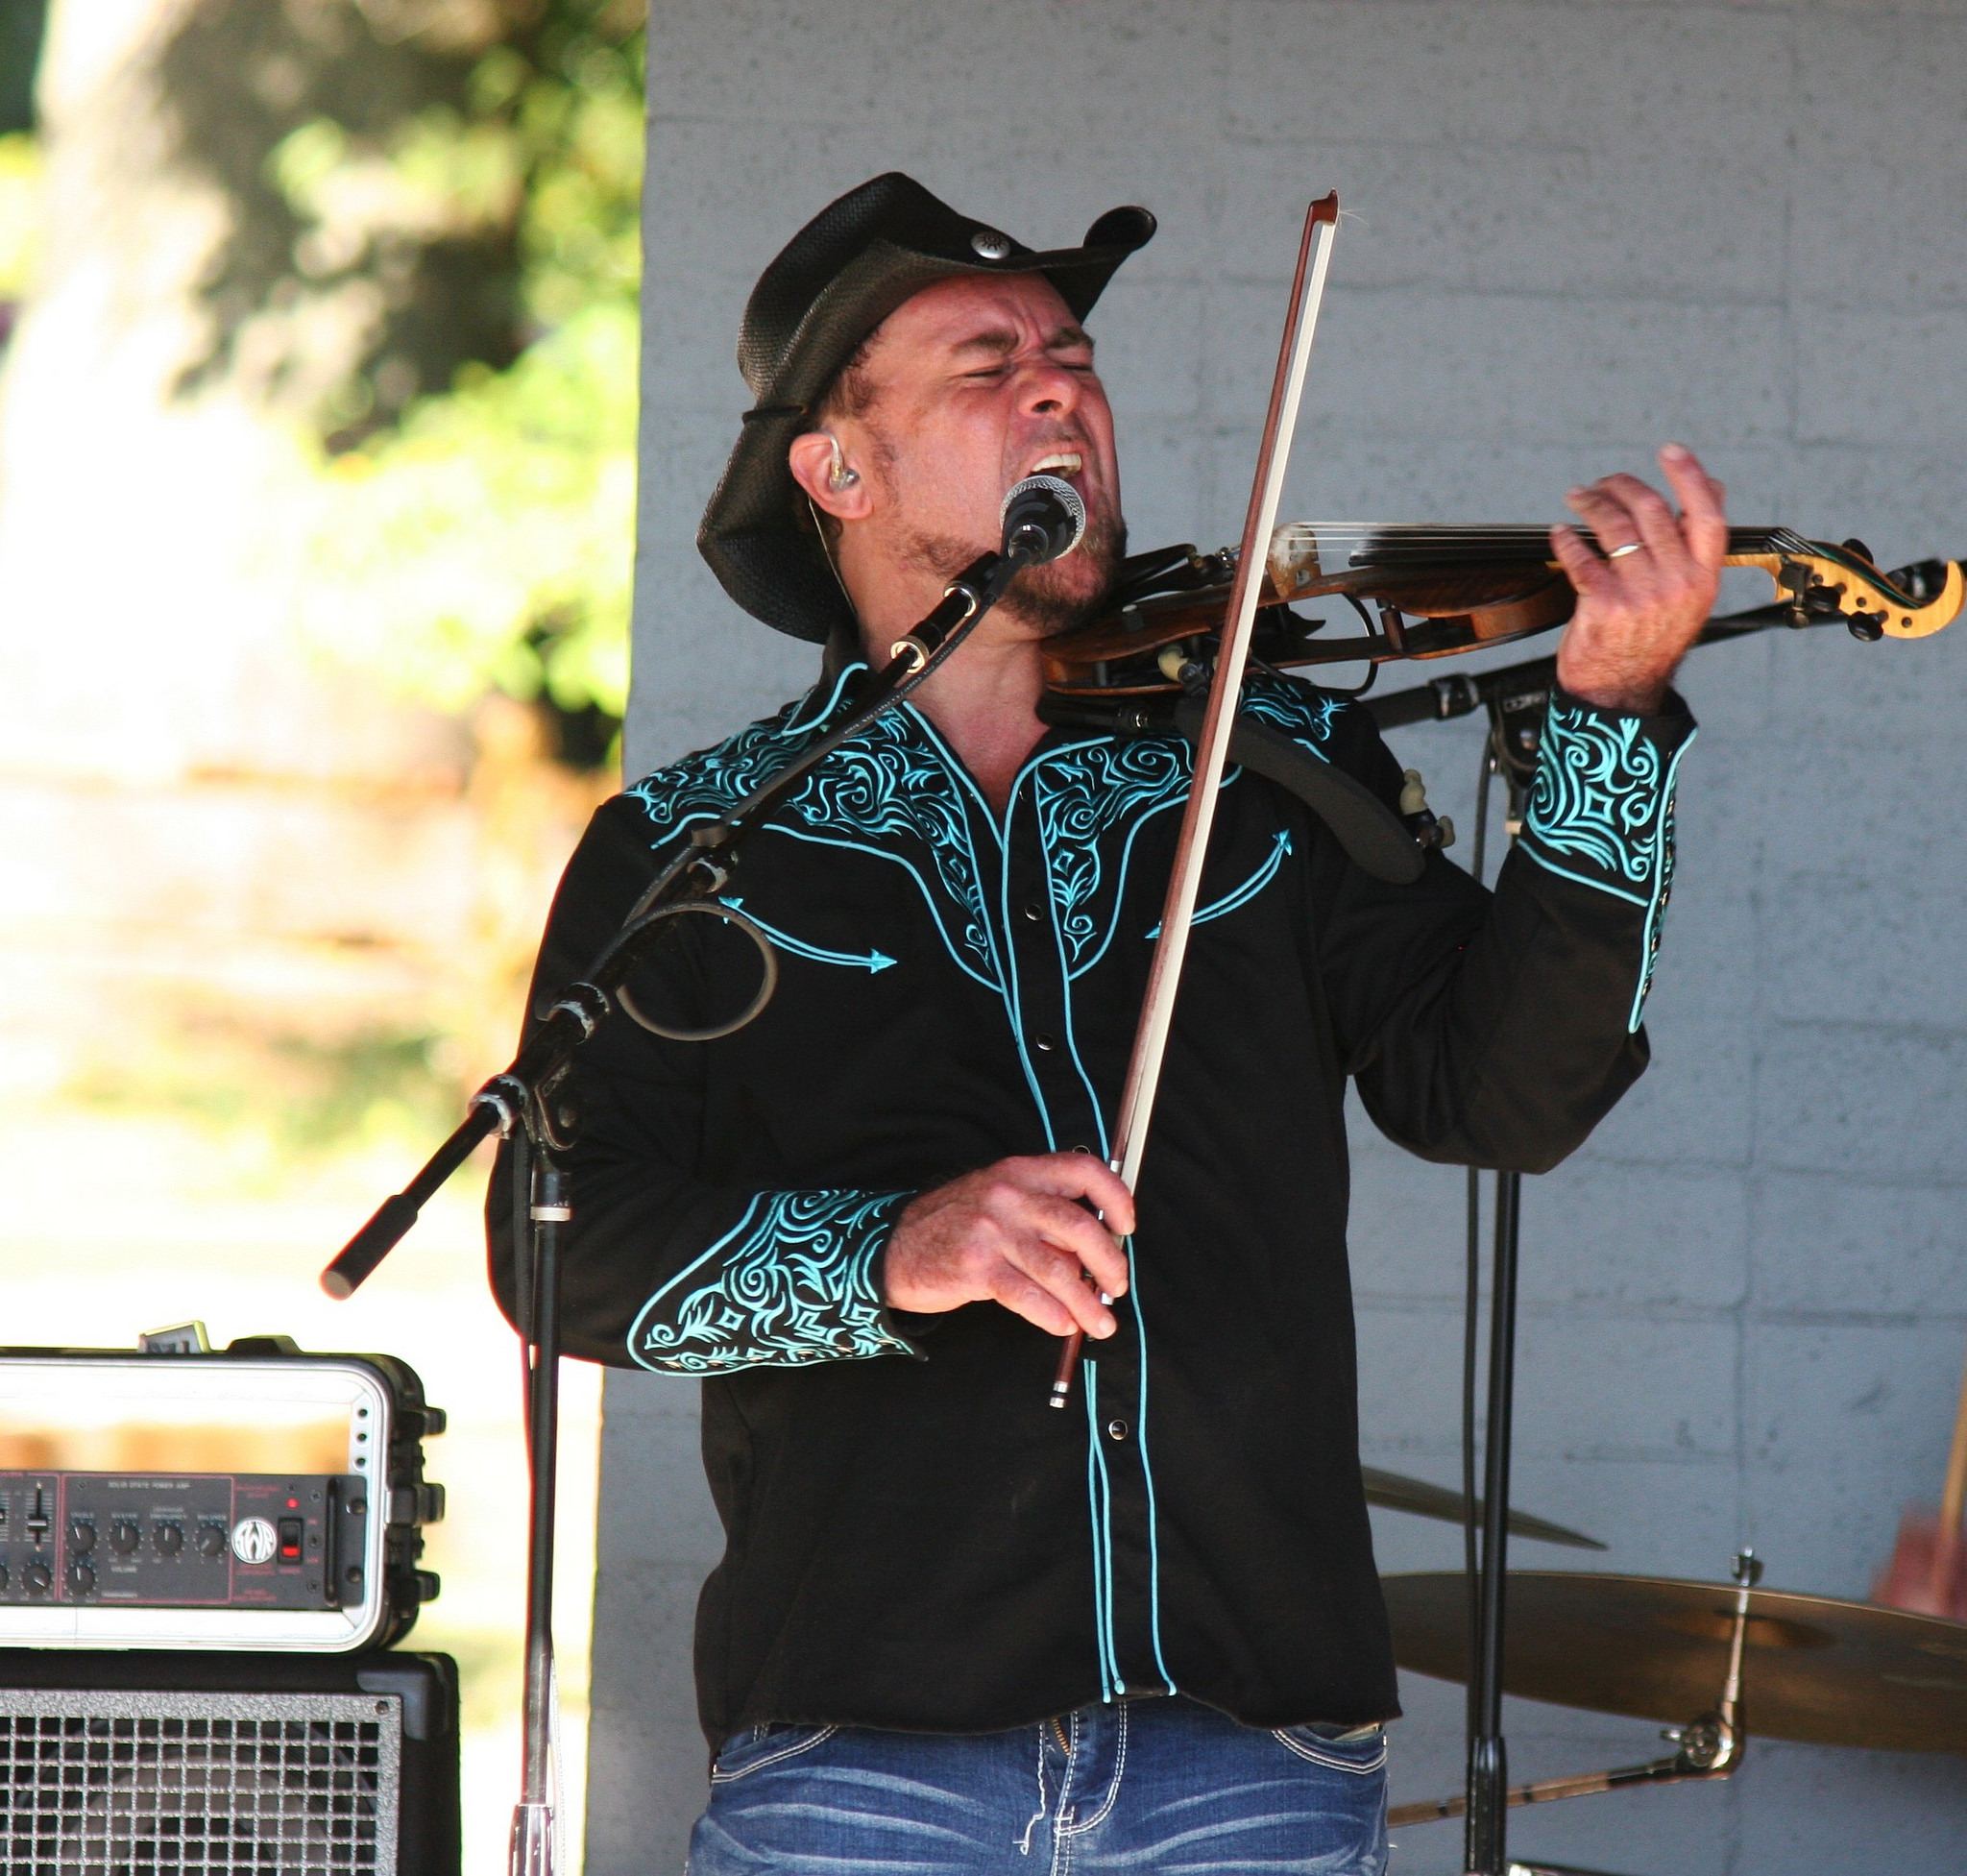 Geoffery Castle performs at the 2014 festival at O.O. Denny Park. Castle returns for another show at DennyFest on Saturday